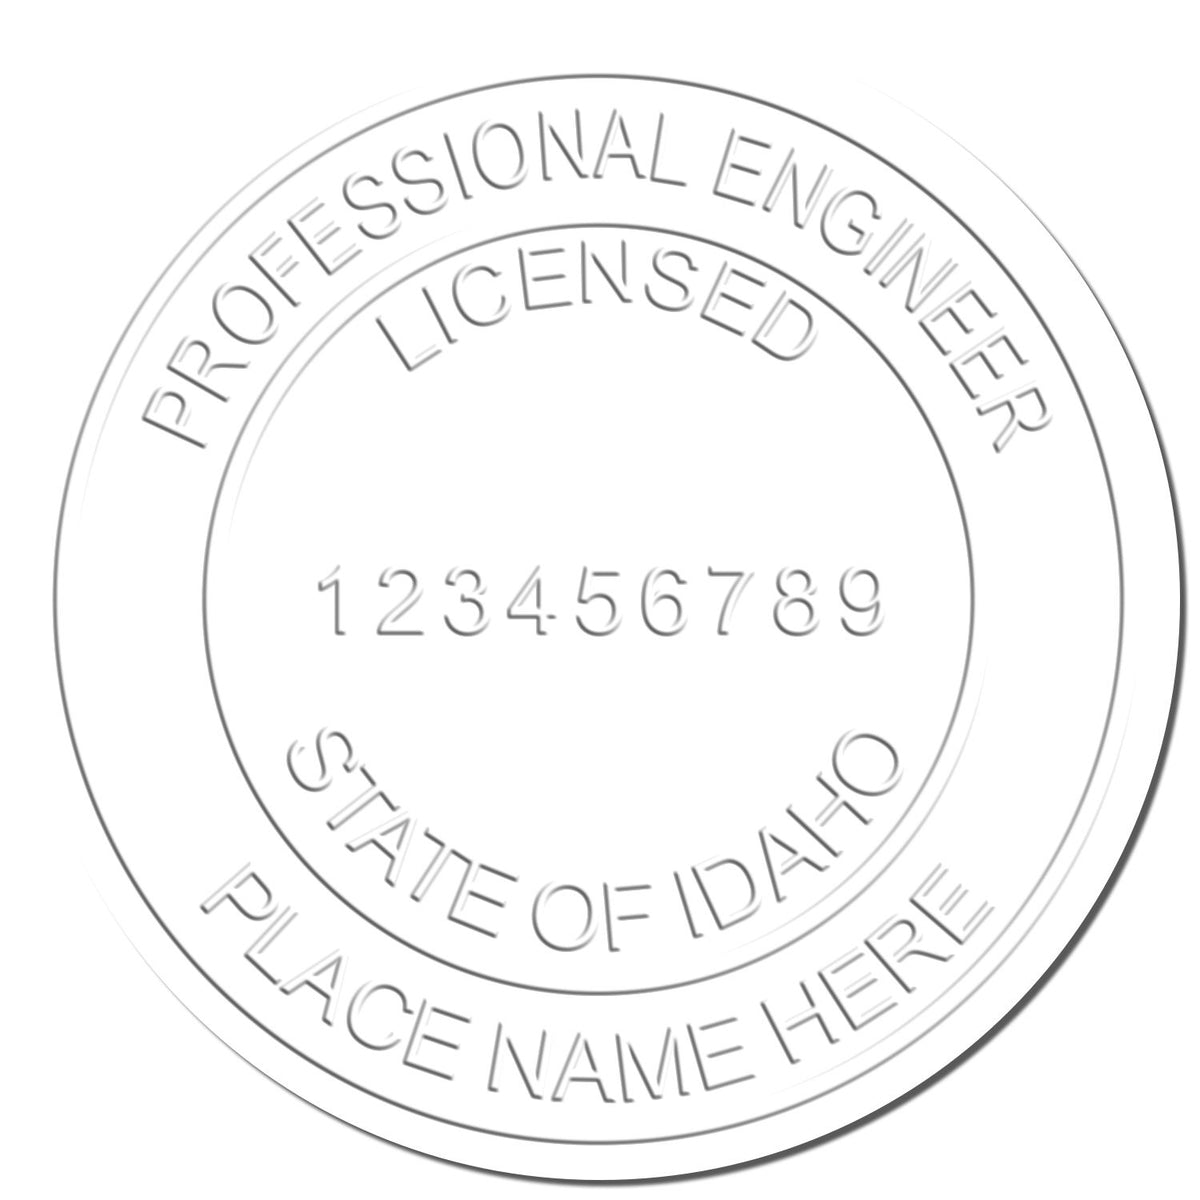 Another Example of a stamped impression of the Idaho Engineer Desk Seal on a piece of office paper.